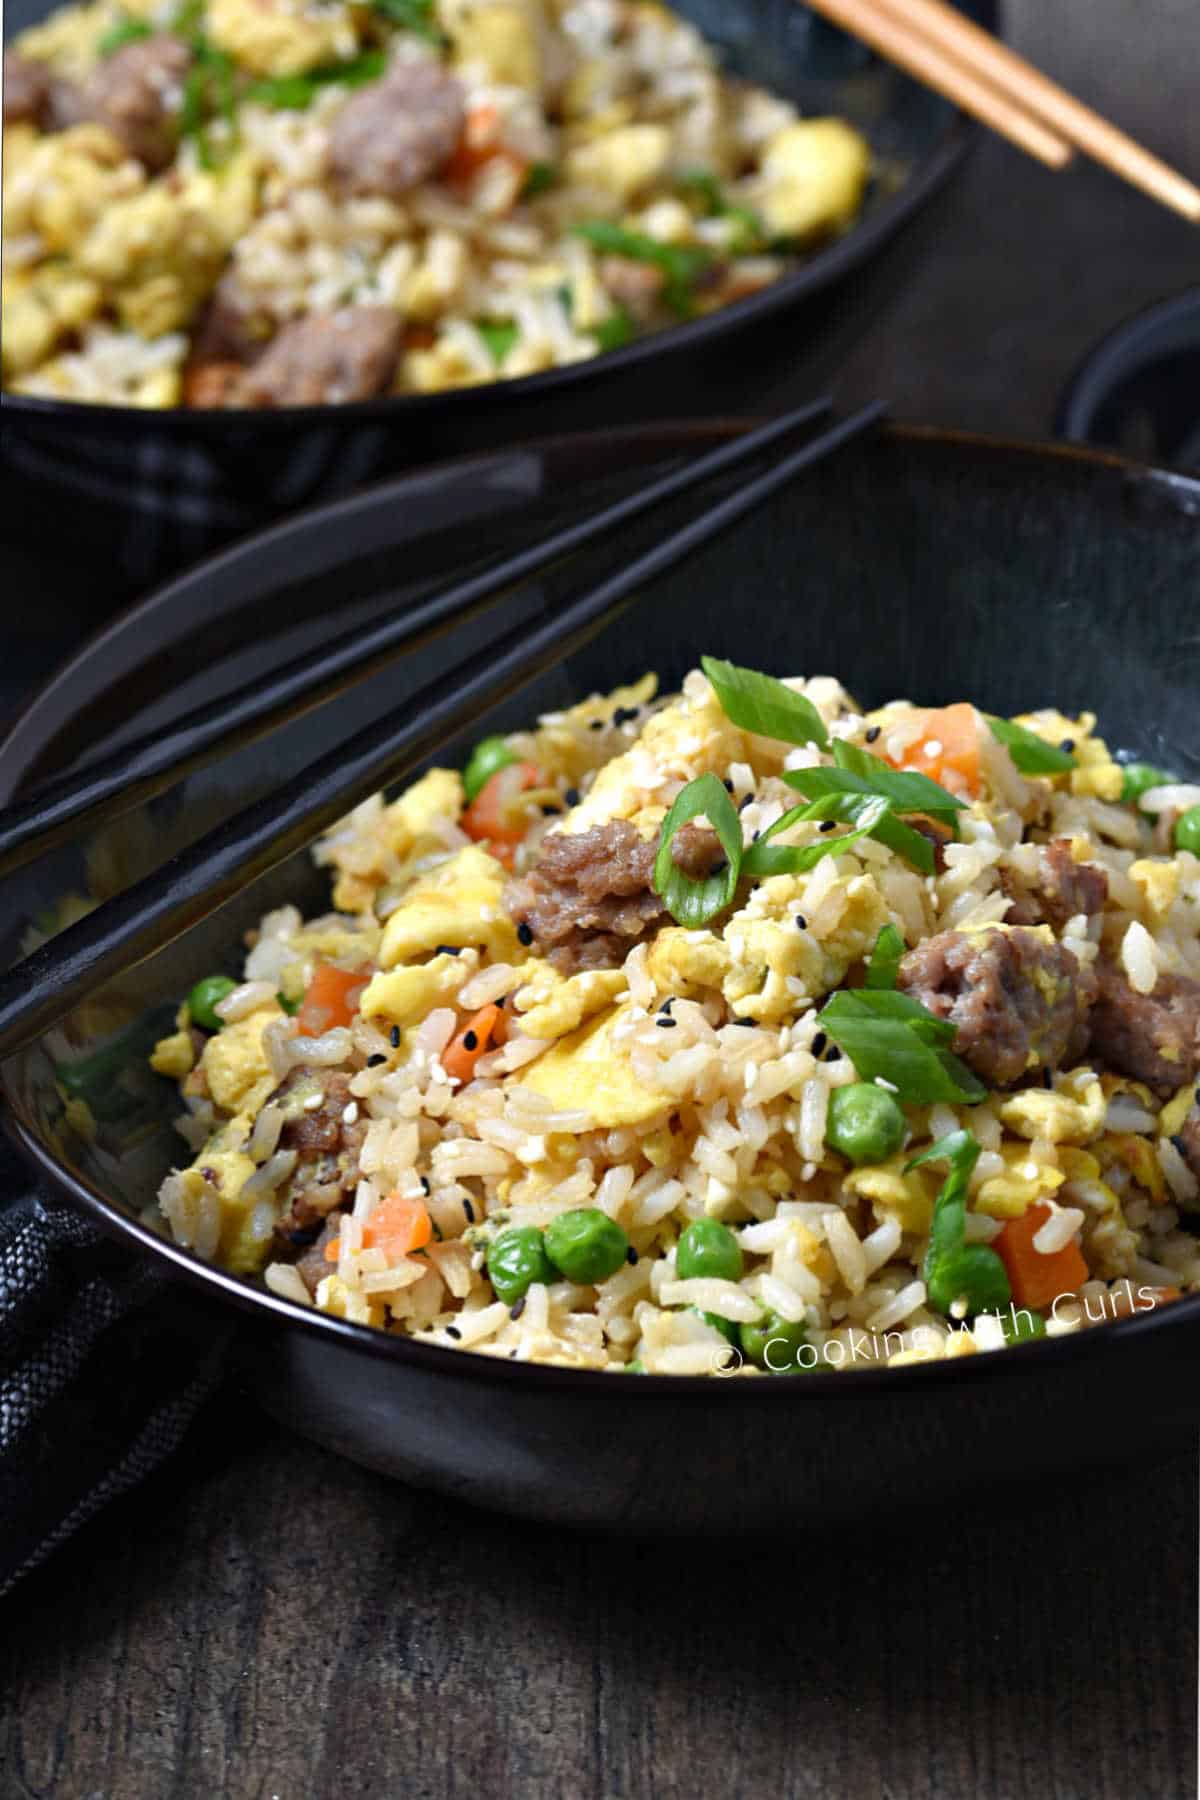 Fried rice, sausage, scrambled eggs, green onions, peas and carrots in a bowl with chopsticks on the edge. 